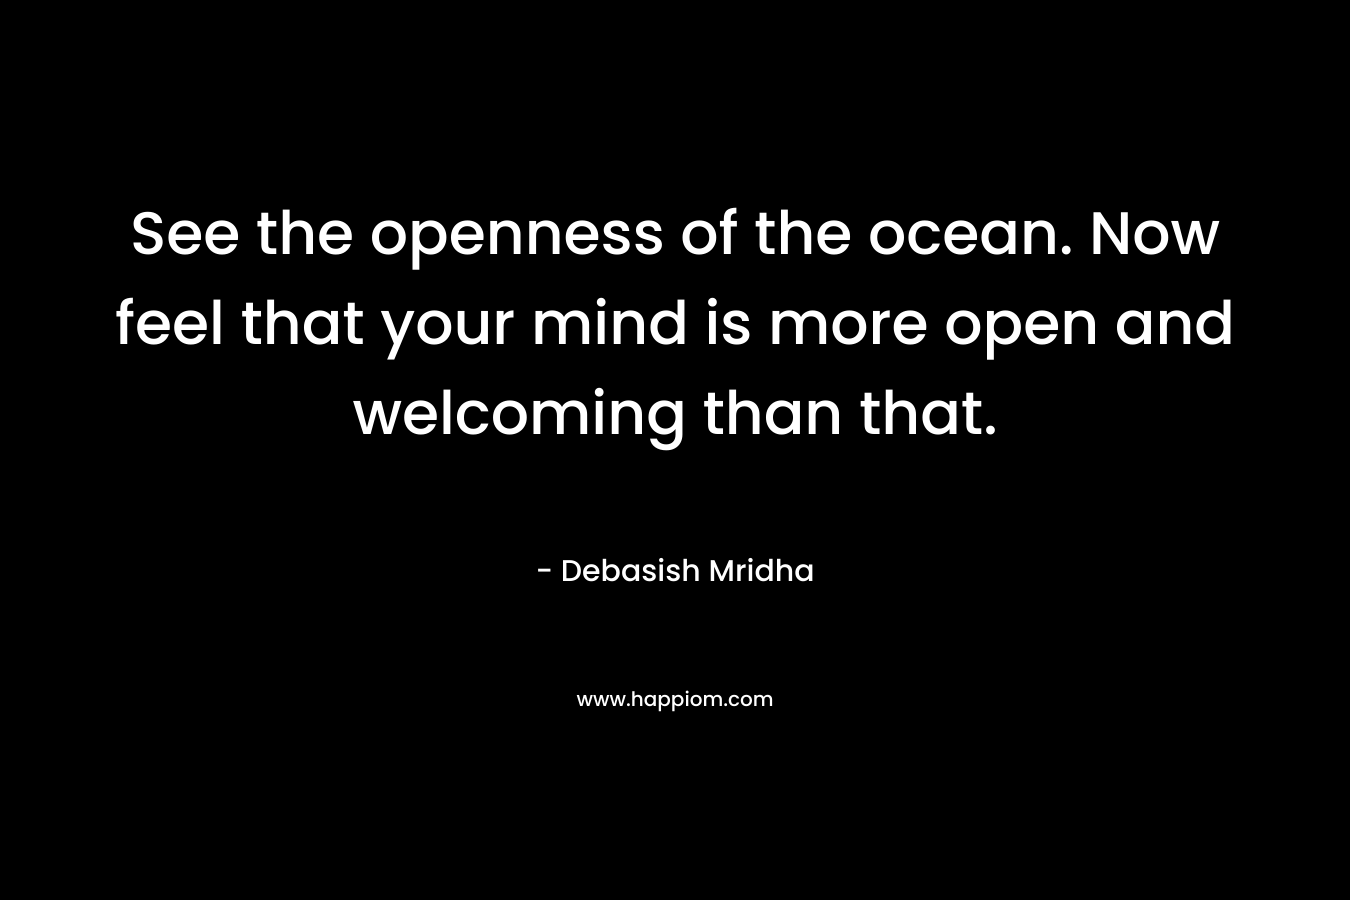 See the openness of the ocean. Now feel that your mind is more open and welcoming than that.